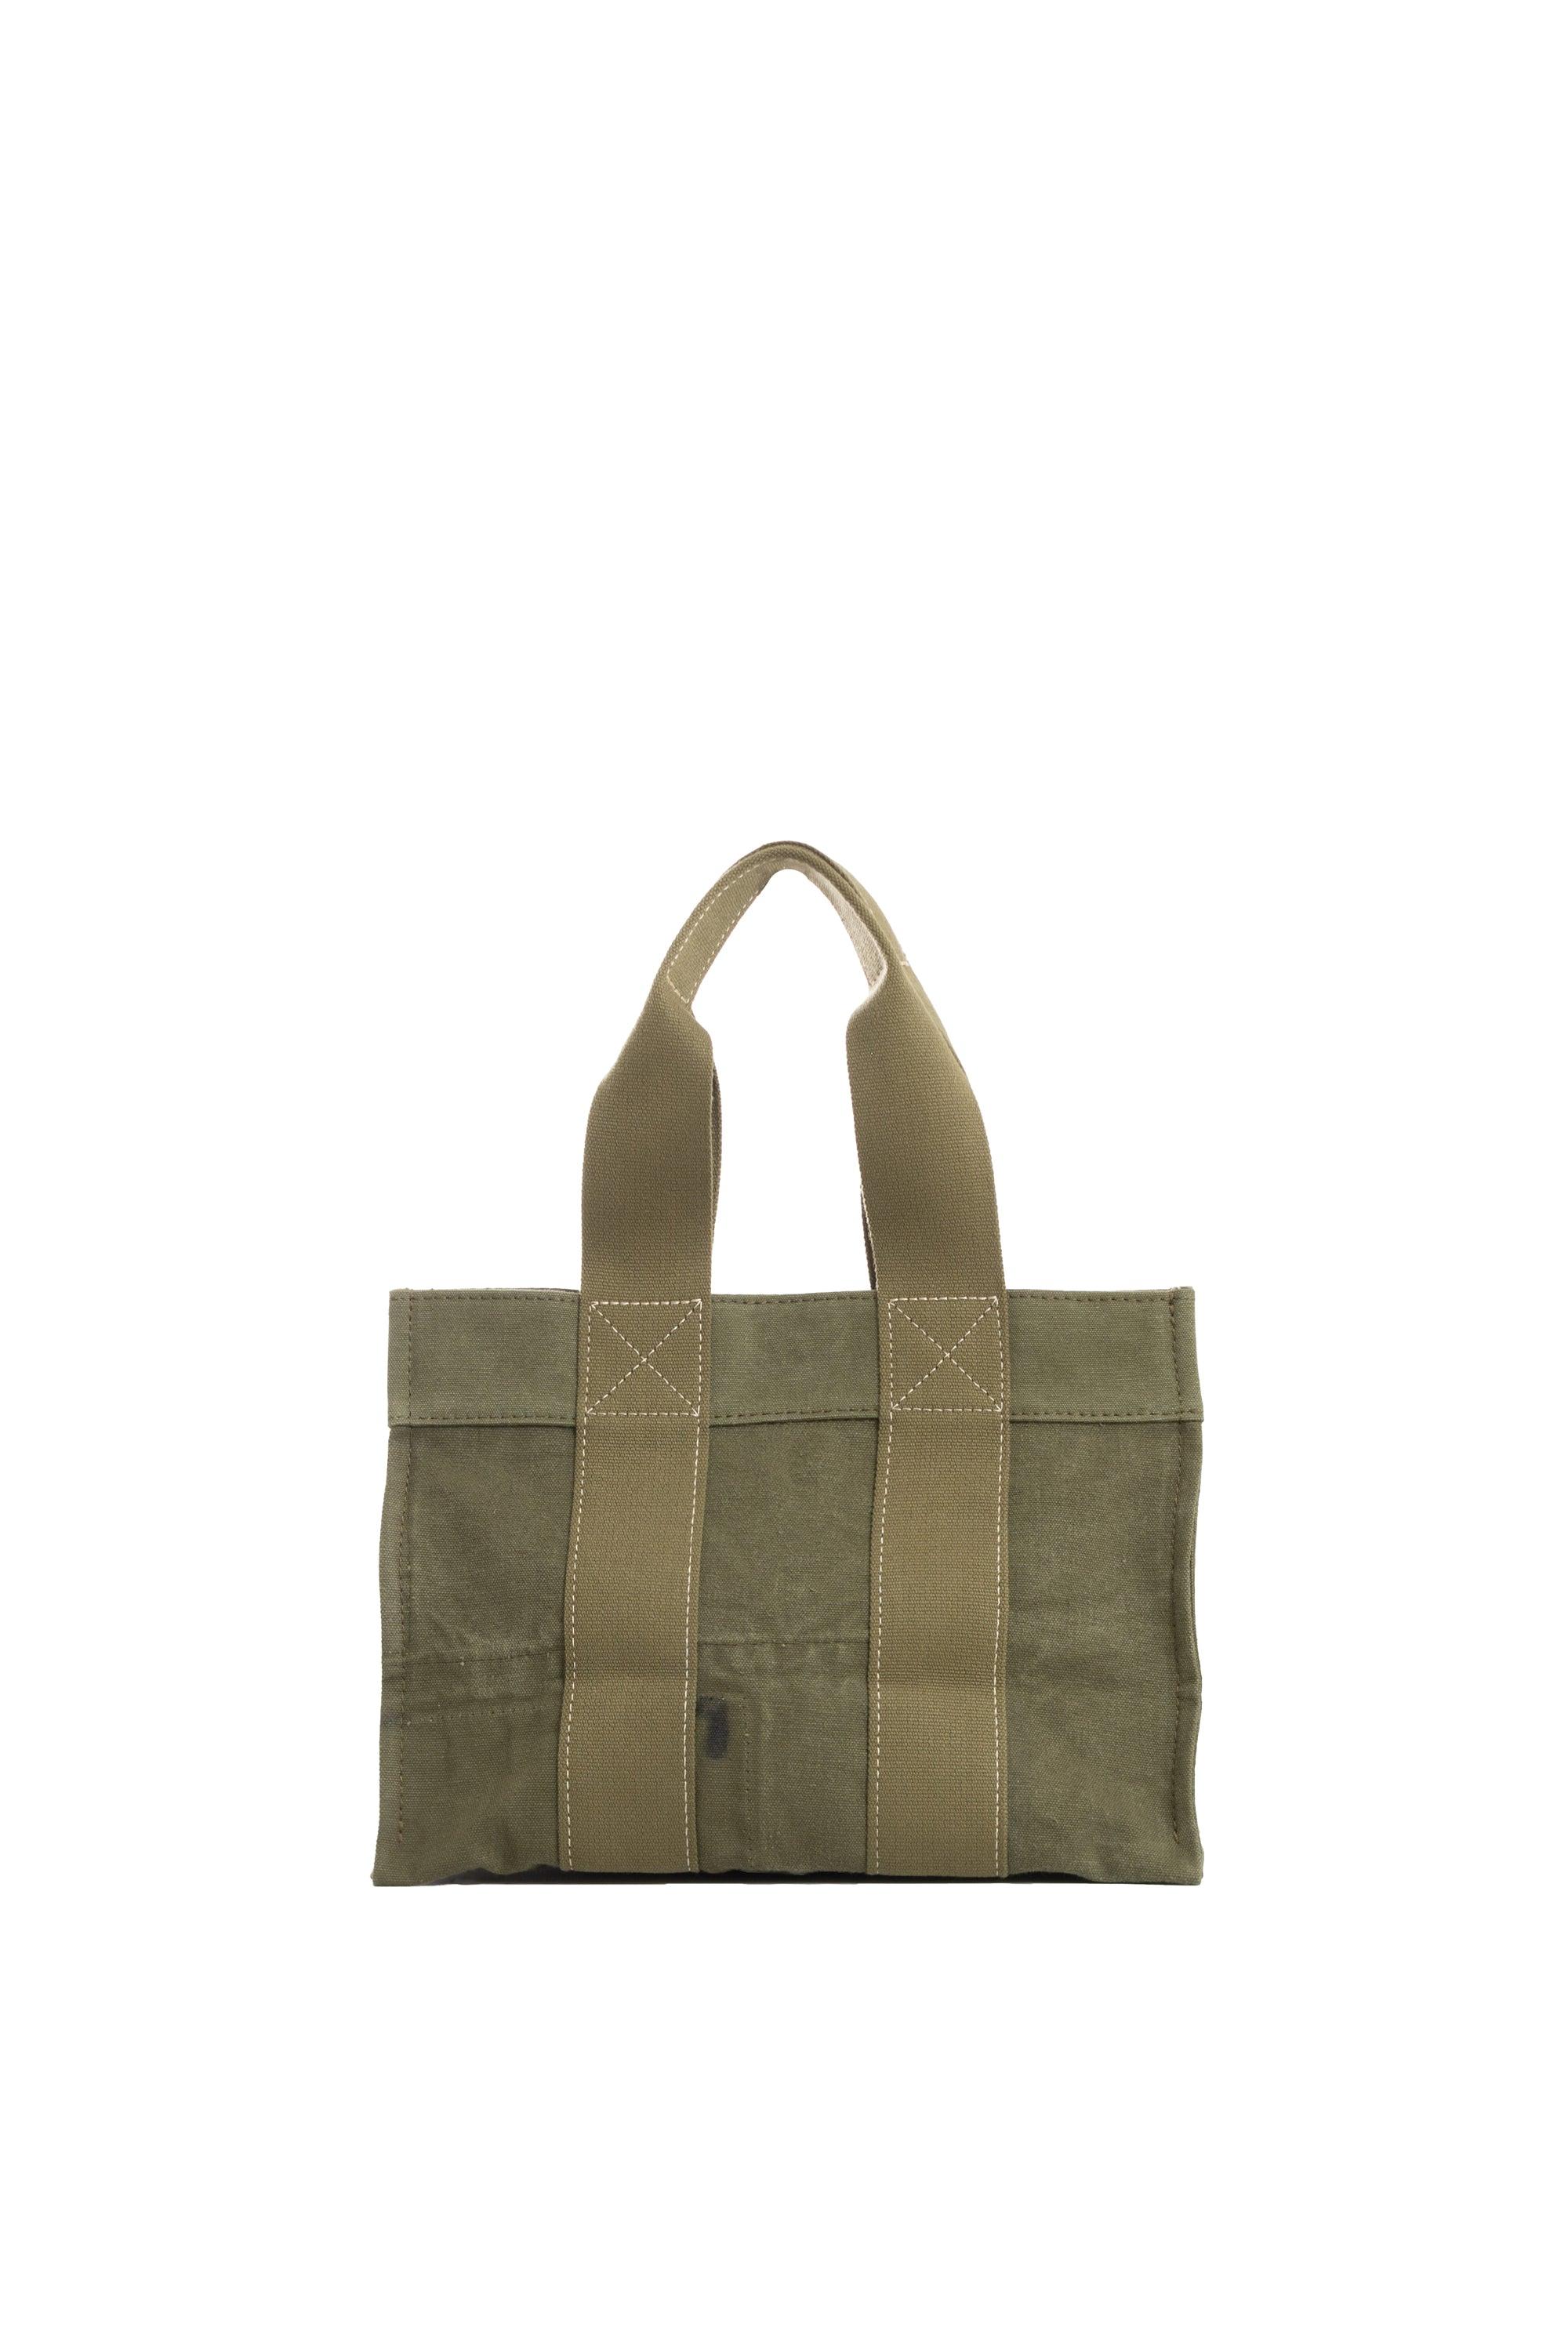 READYMADE EASY TOTE SMALLトートバッグ - バッグ